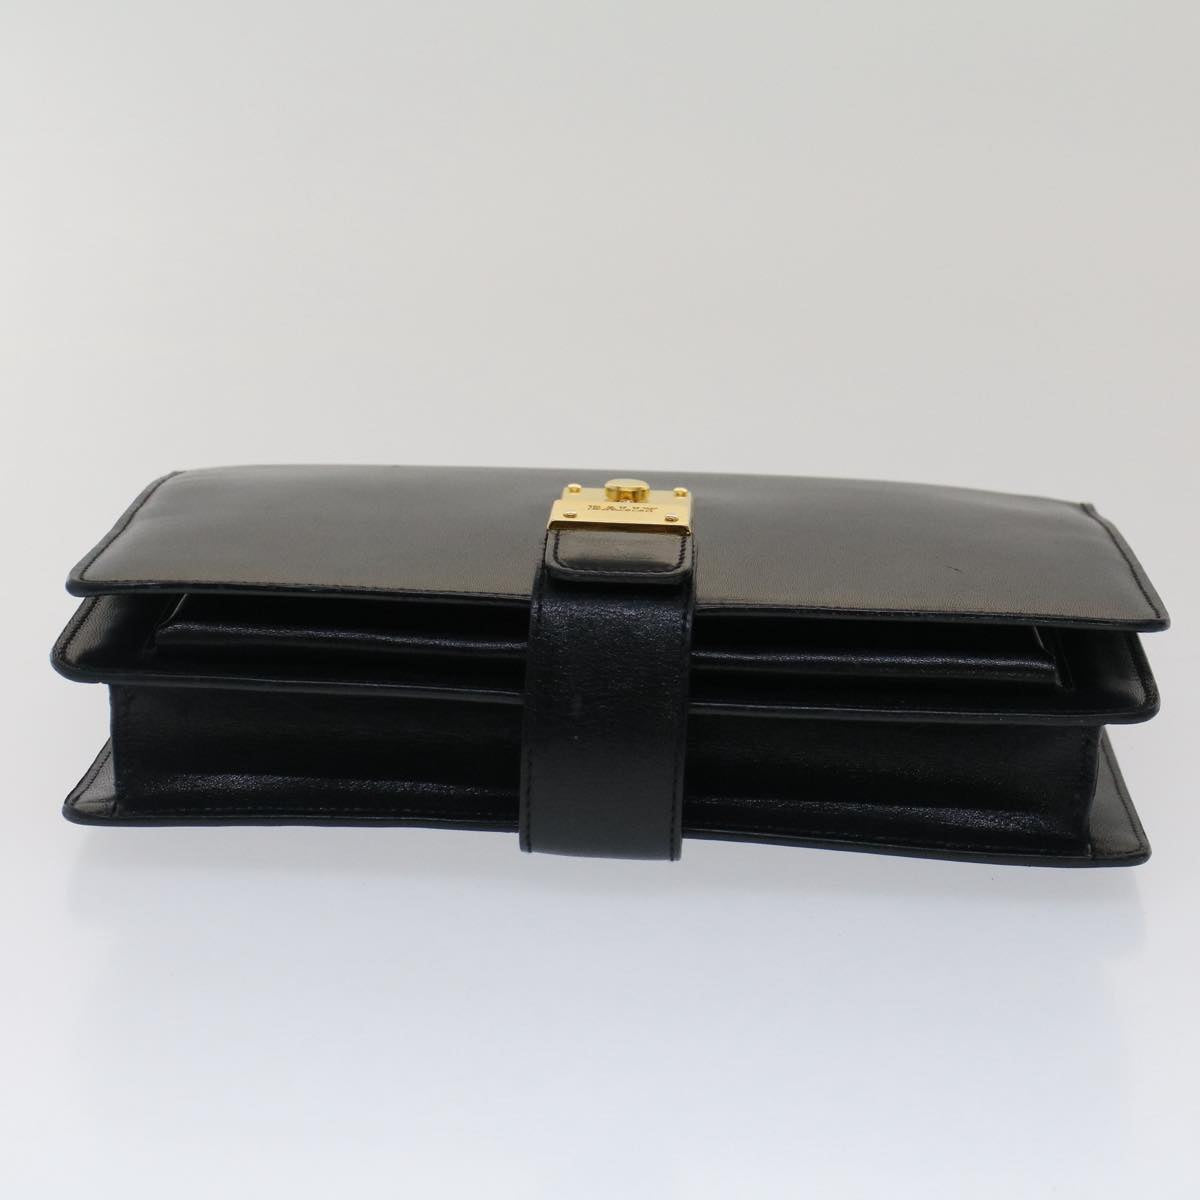 BALLY Clutch Bag Leather Black Auth bs7387